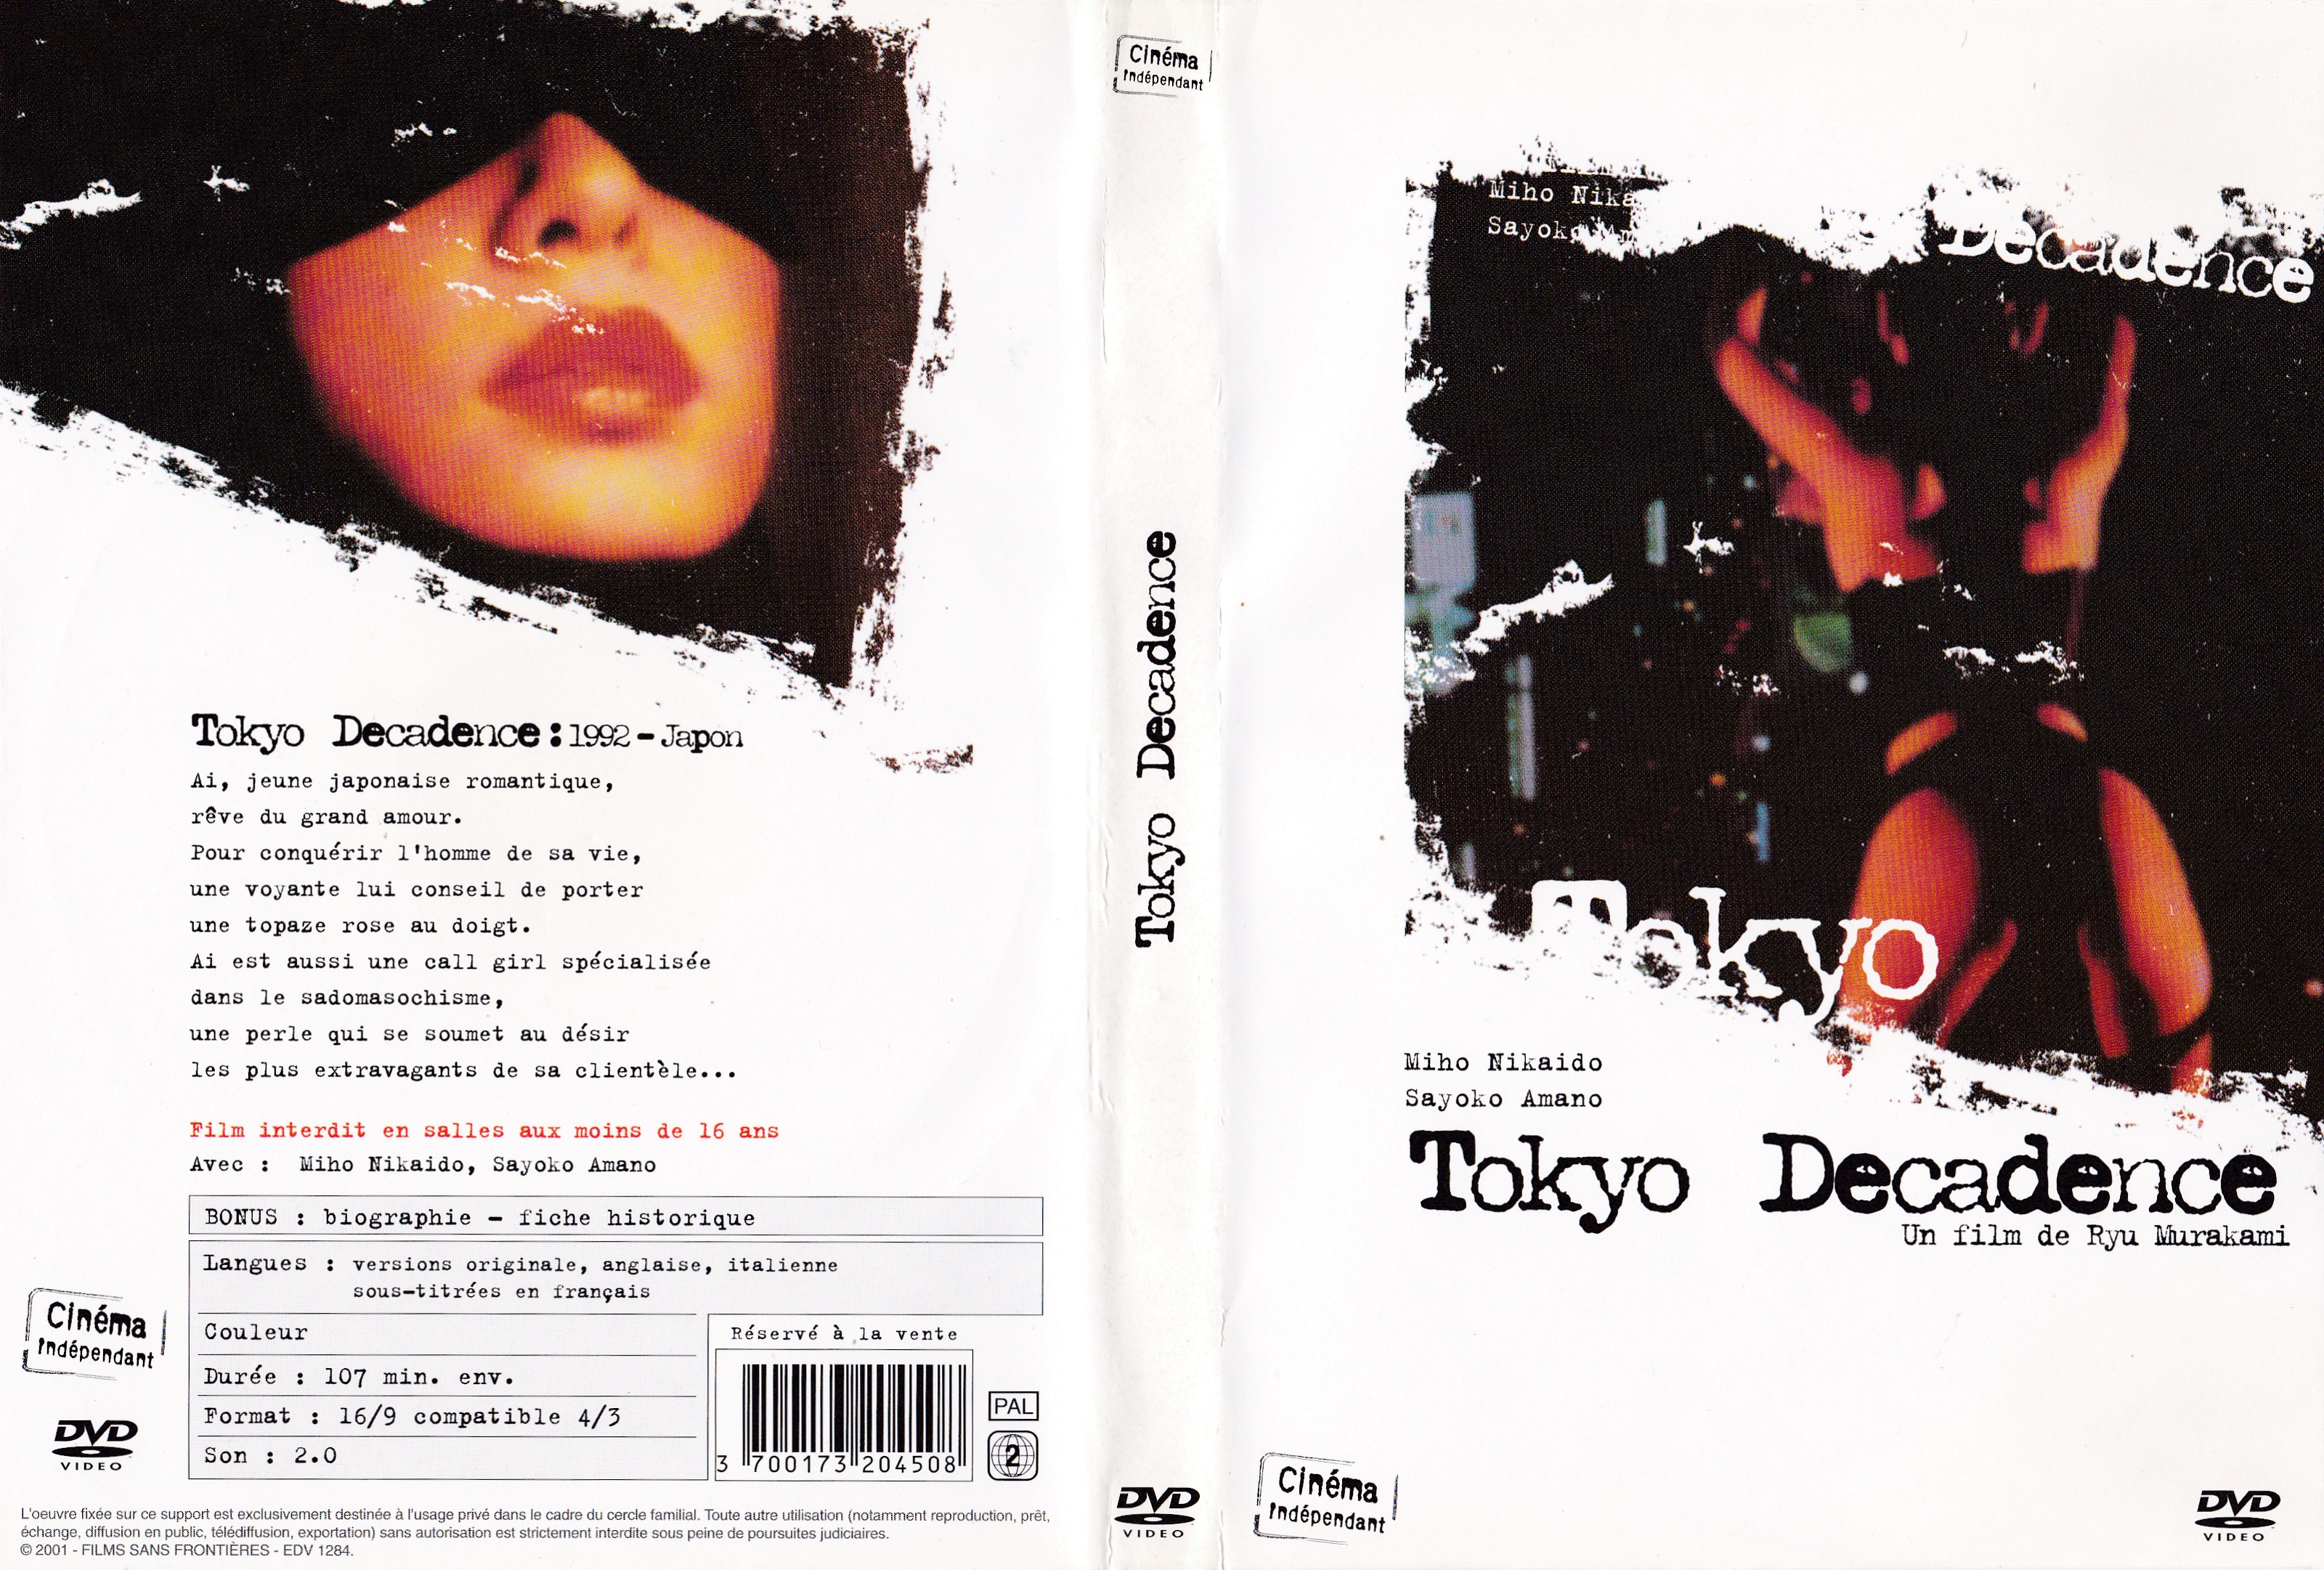 Jaquette DVD Tokyo decadence